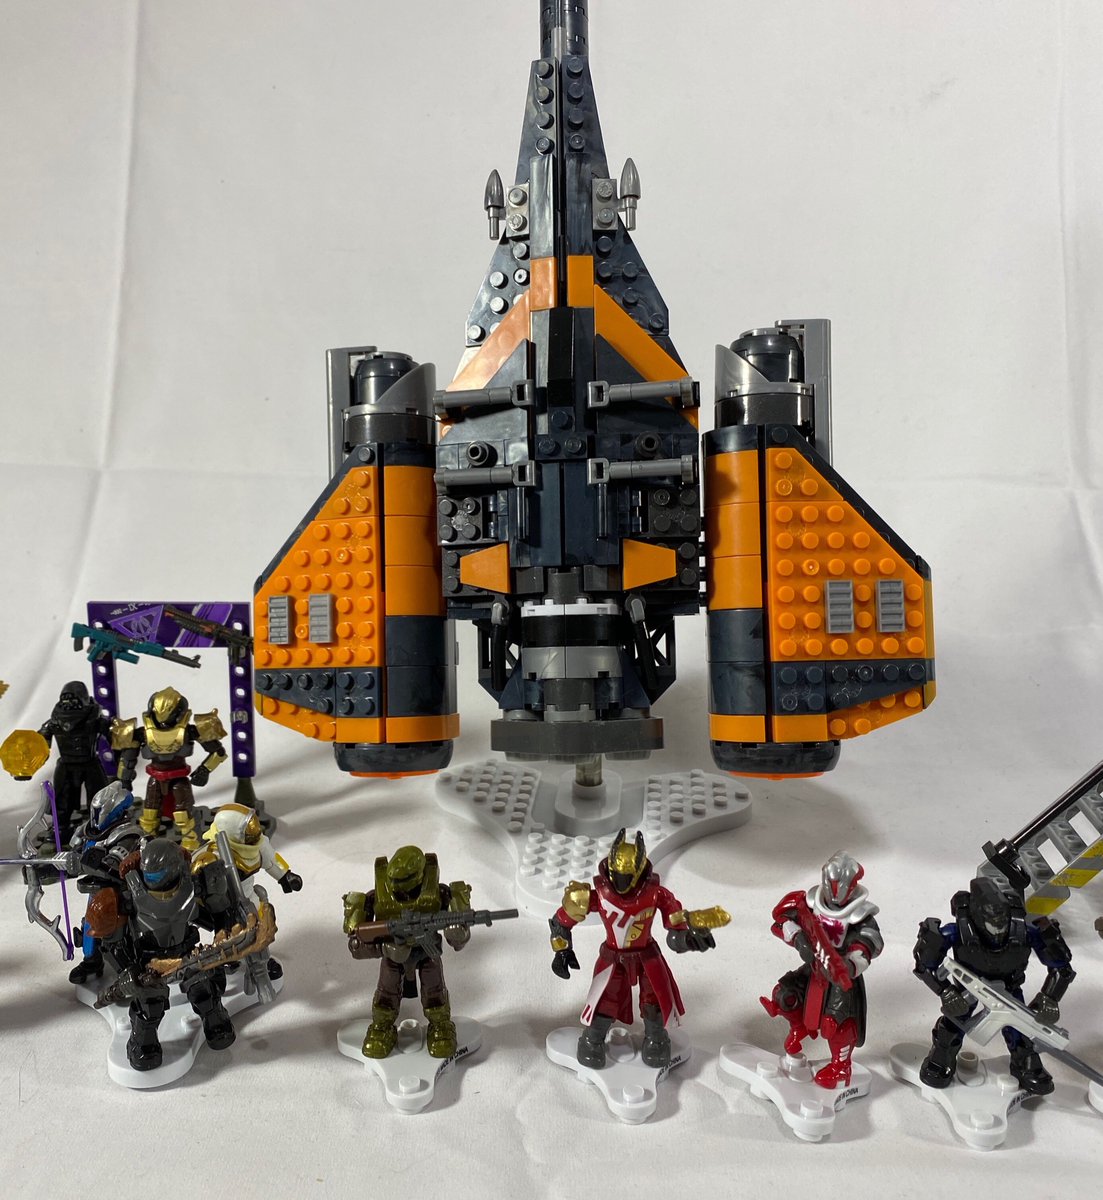 To begin with my first positive, the sets themselves had a great level of quality. Each build from the Arcadia to the Spider Walker (my personal favorite) were very fun to construct and play with. The sets also had a great amount of detail, and were easily worth the price.